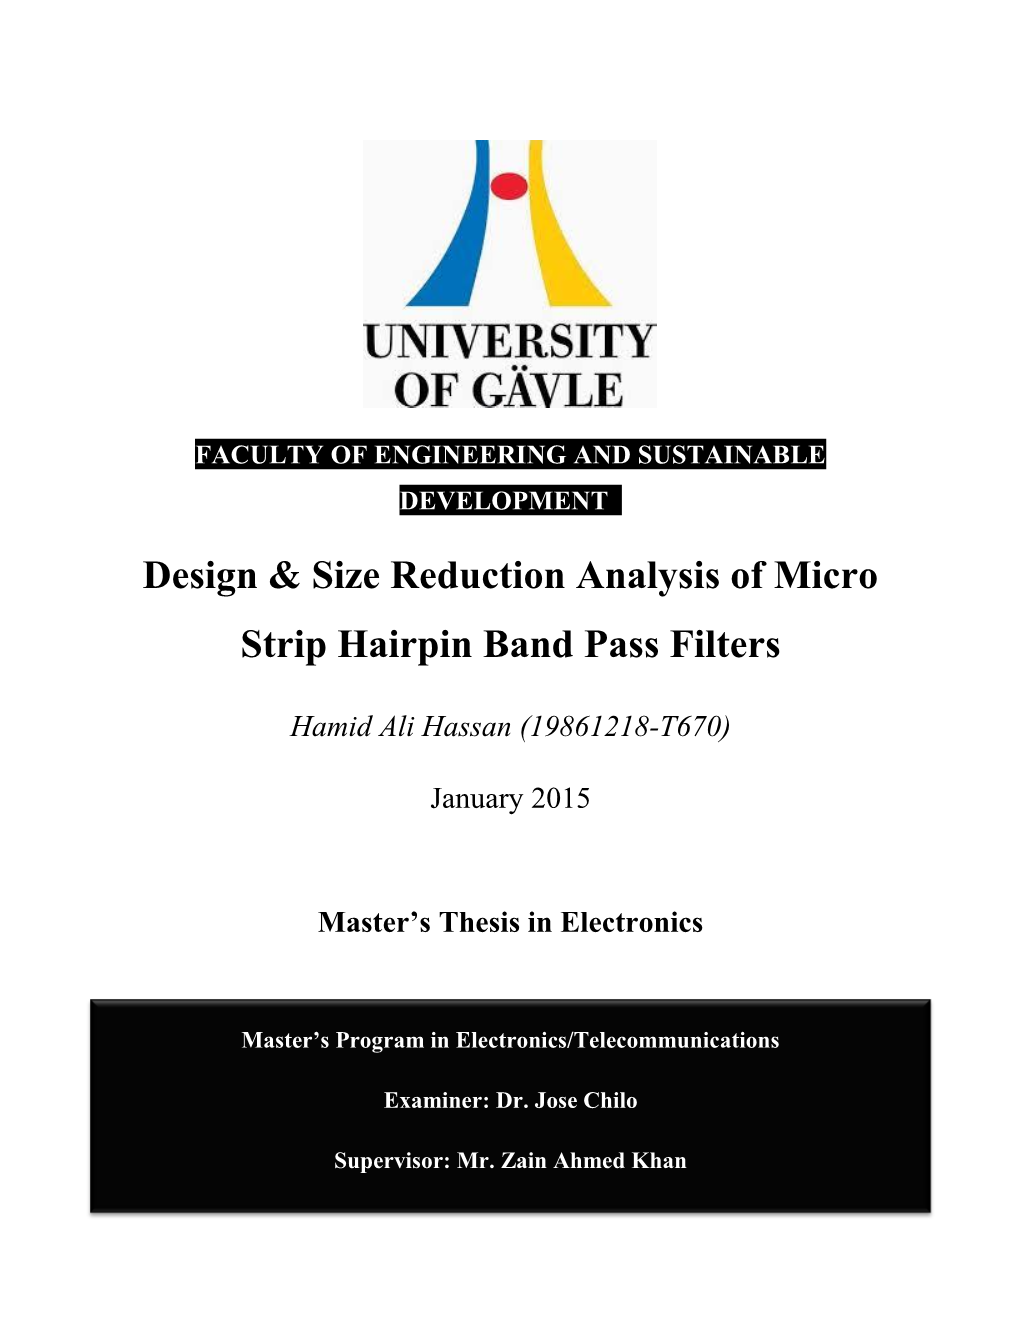 Design & Size Reduction Analysis of Micro Strip Hairpin Band Pass Filters